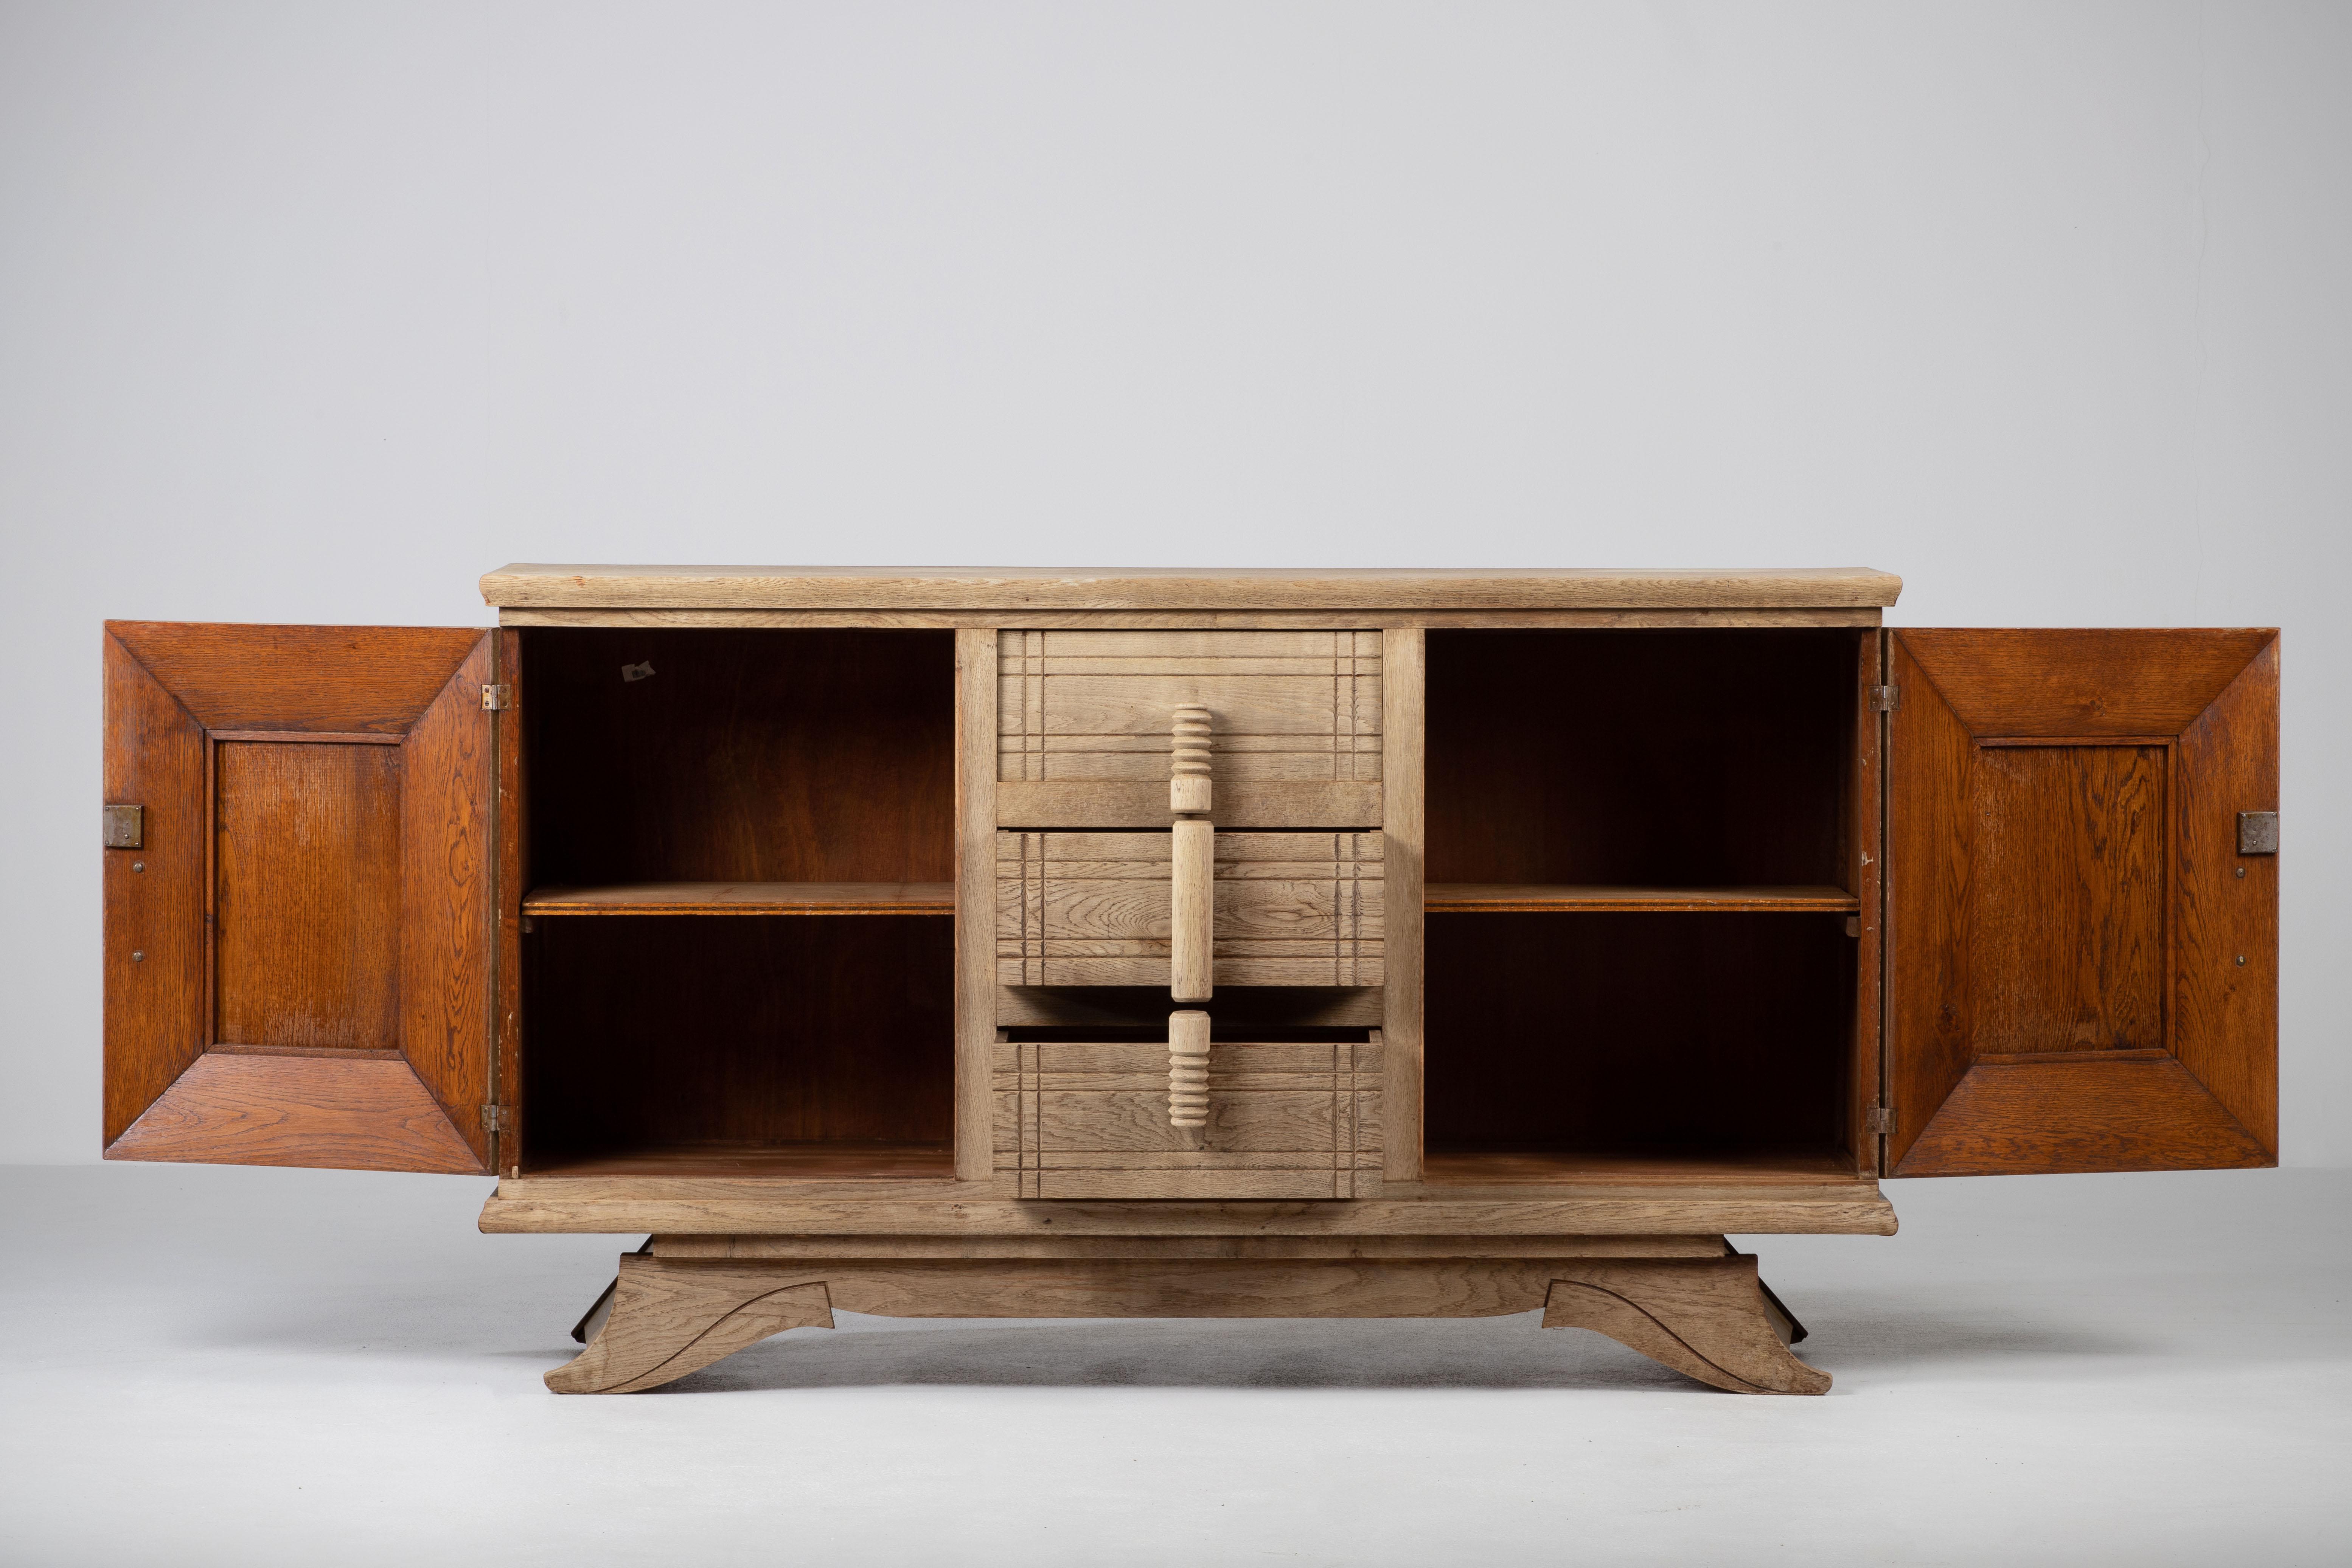 Credenza, solid oak, France, 1940s.
Large Art Deco Brutalist sideboard. 
This heavy Brutalist credenza features a minimal geometric design. The credenza consists of two storage facilities covered with geometric door panels and three drawers in the